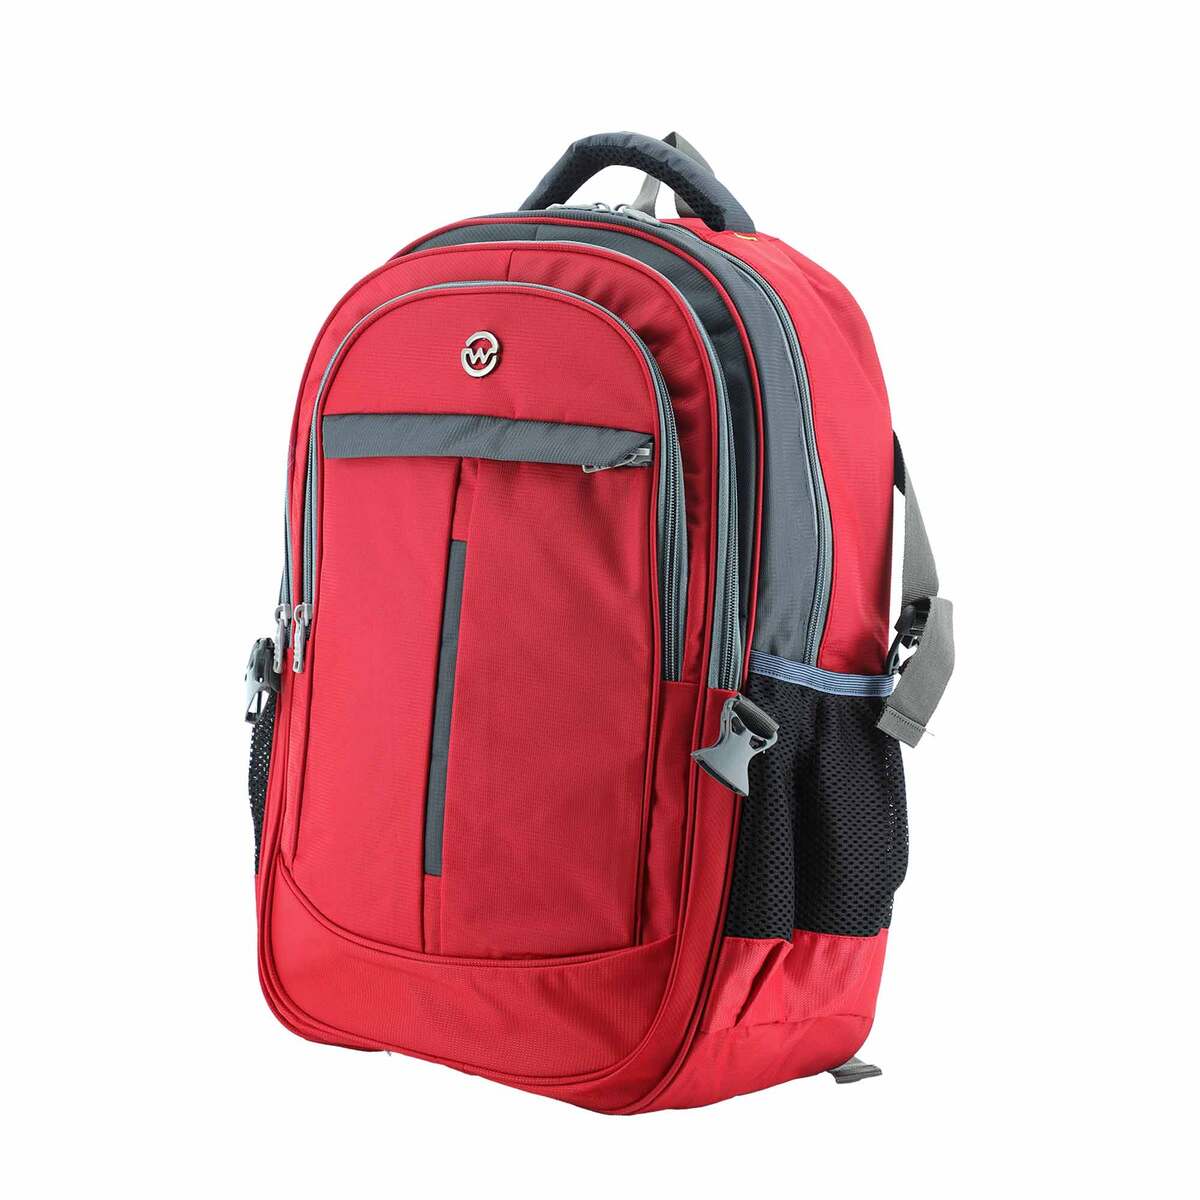 Wagon R Vibrant Backpack 8006 19inch, Assorted